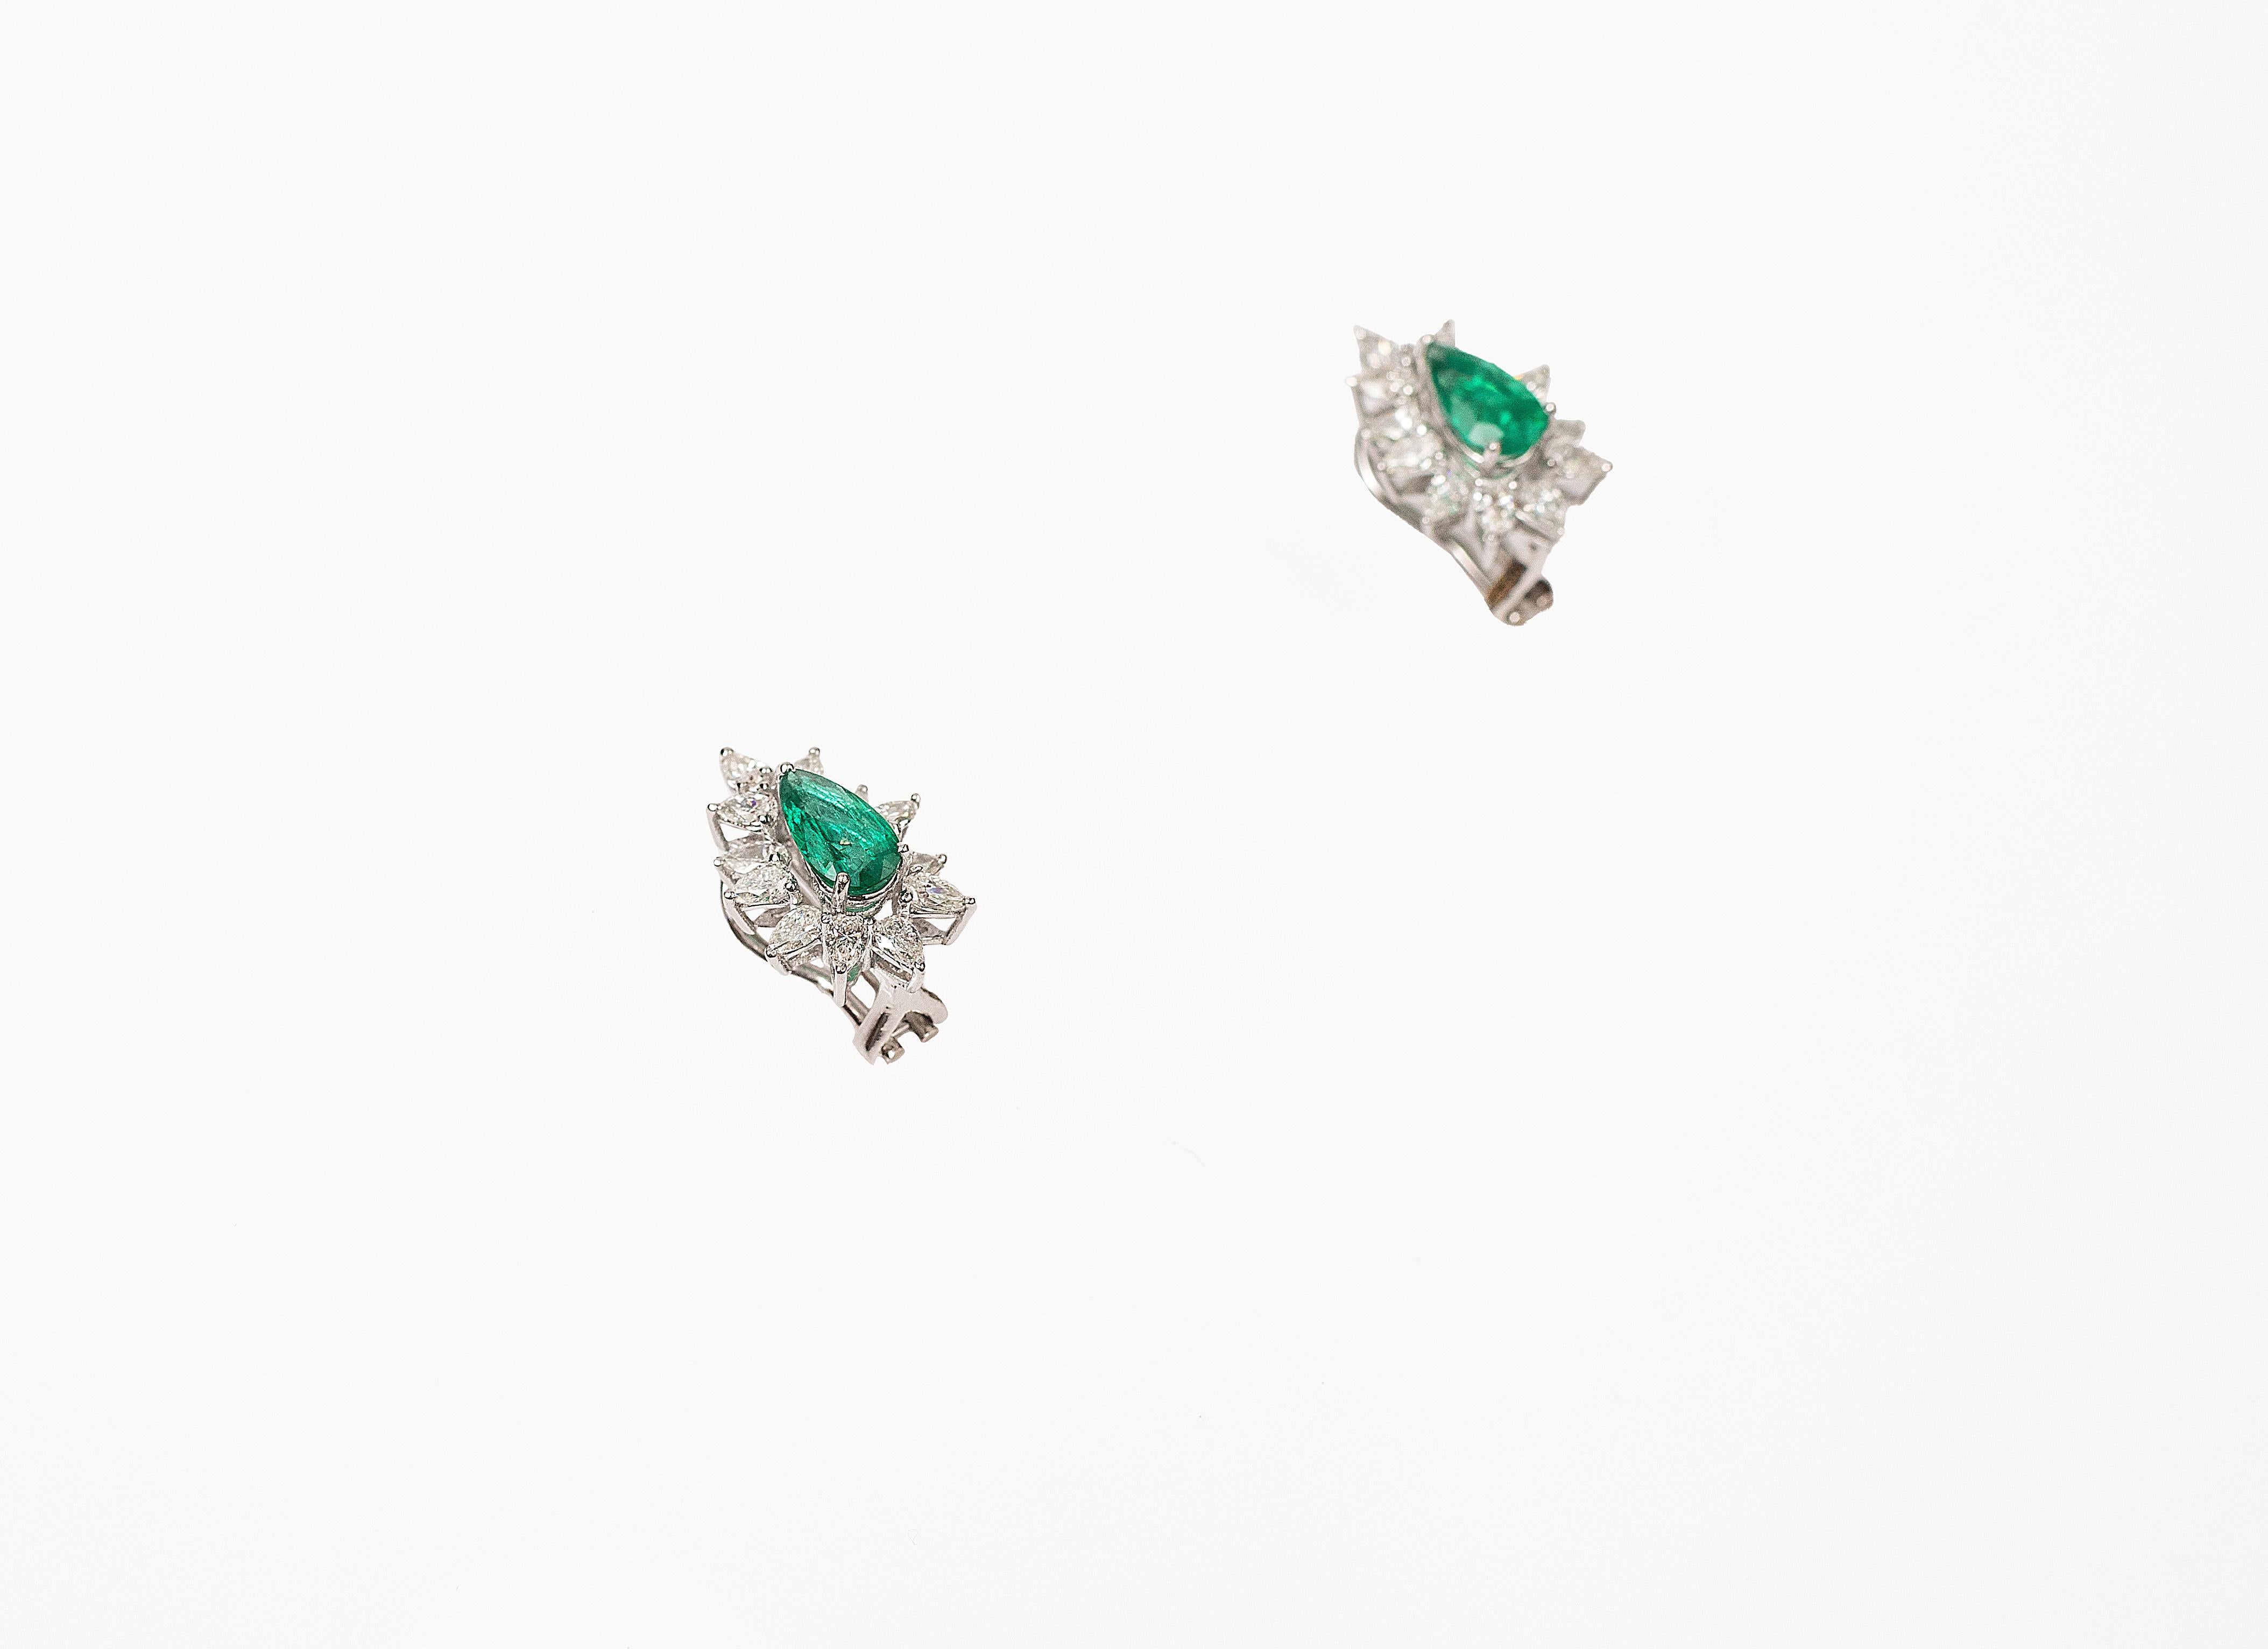 Handcrafted elegant Stud Earrings in 18K Gold Studded with Fancy Shape Diamond and Natural Emerald.
Gold Weight - 6.030 gms

Diamond Clarity - VS-Si
Colour - G-H

Emerald - Pear Shape Natural Emerald
